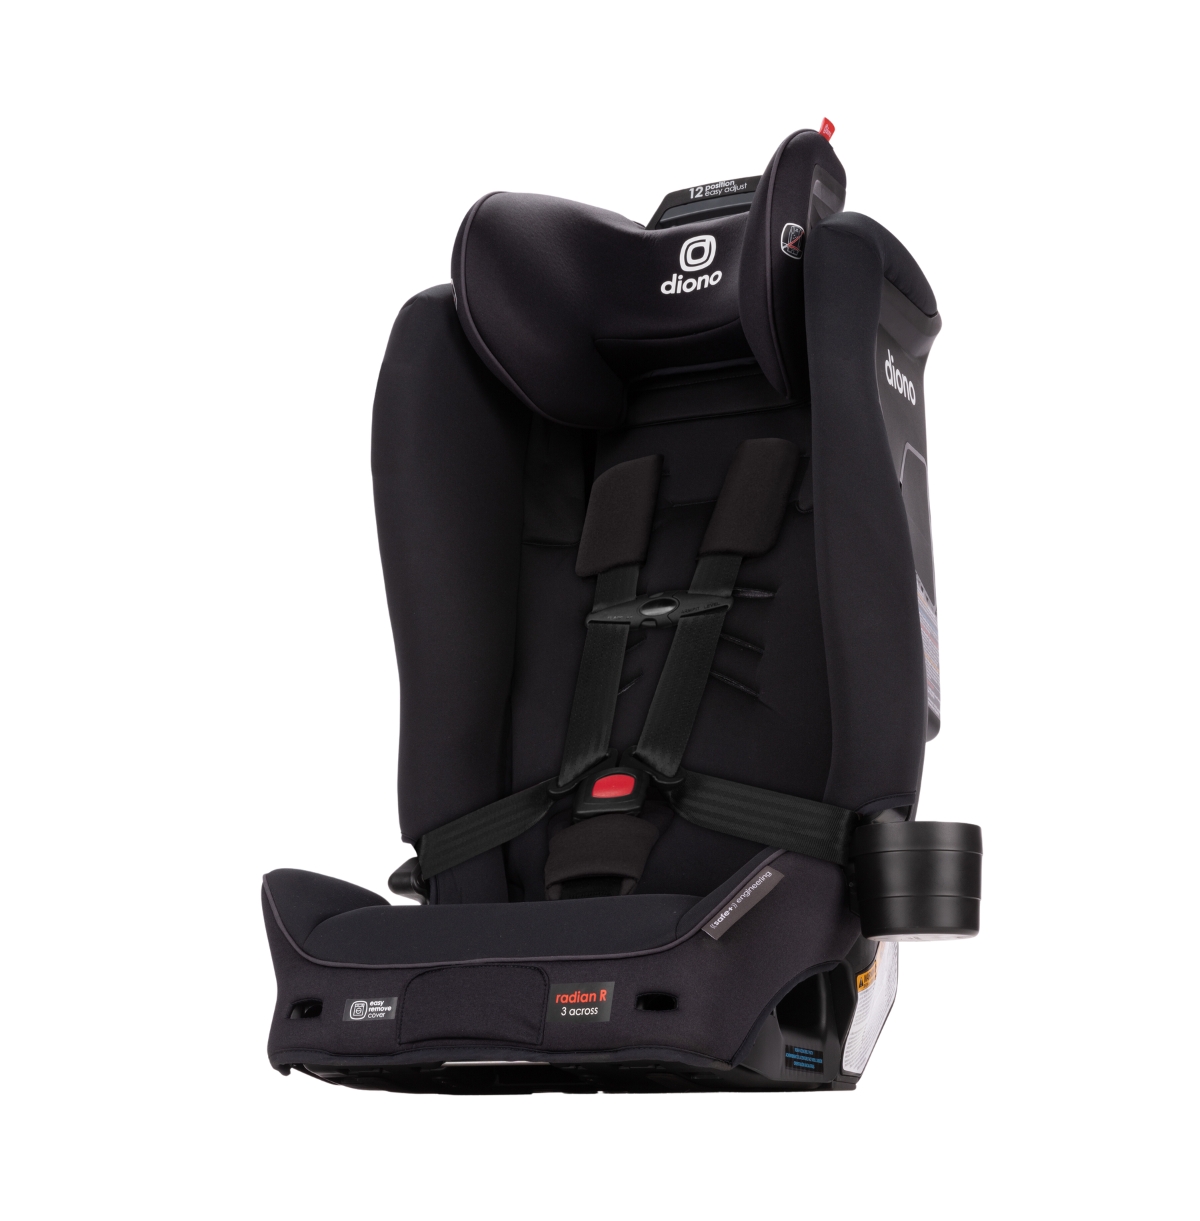 Diono Radian 3r Safeplus All-in-one Convertible Car Seat In Black Jet